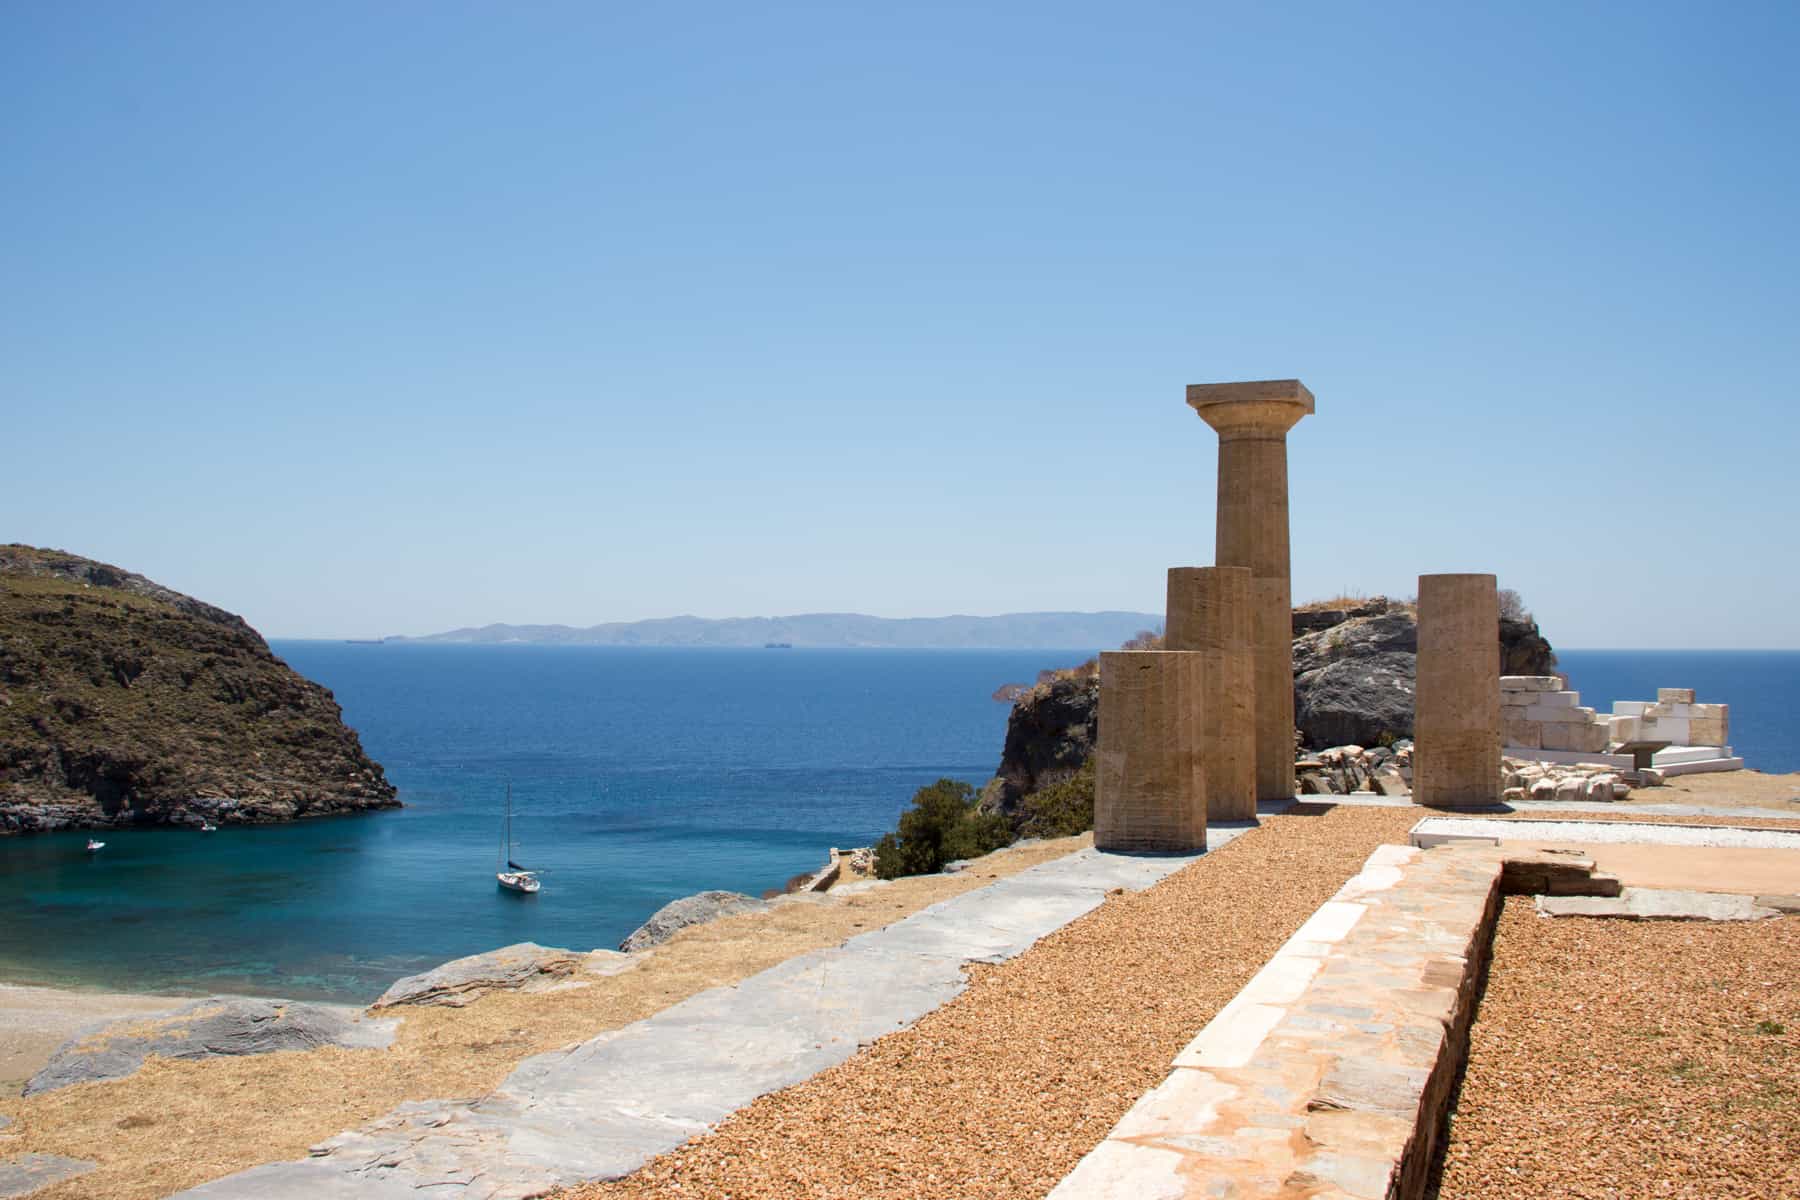 The four columns of the Temple of Athena sit on a hillside of the ancient city of Karthea in Kea island, overlooking the shimmering blue ocean water